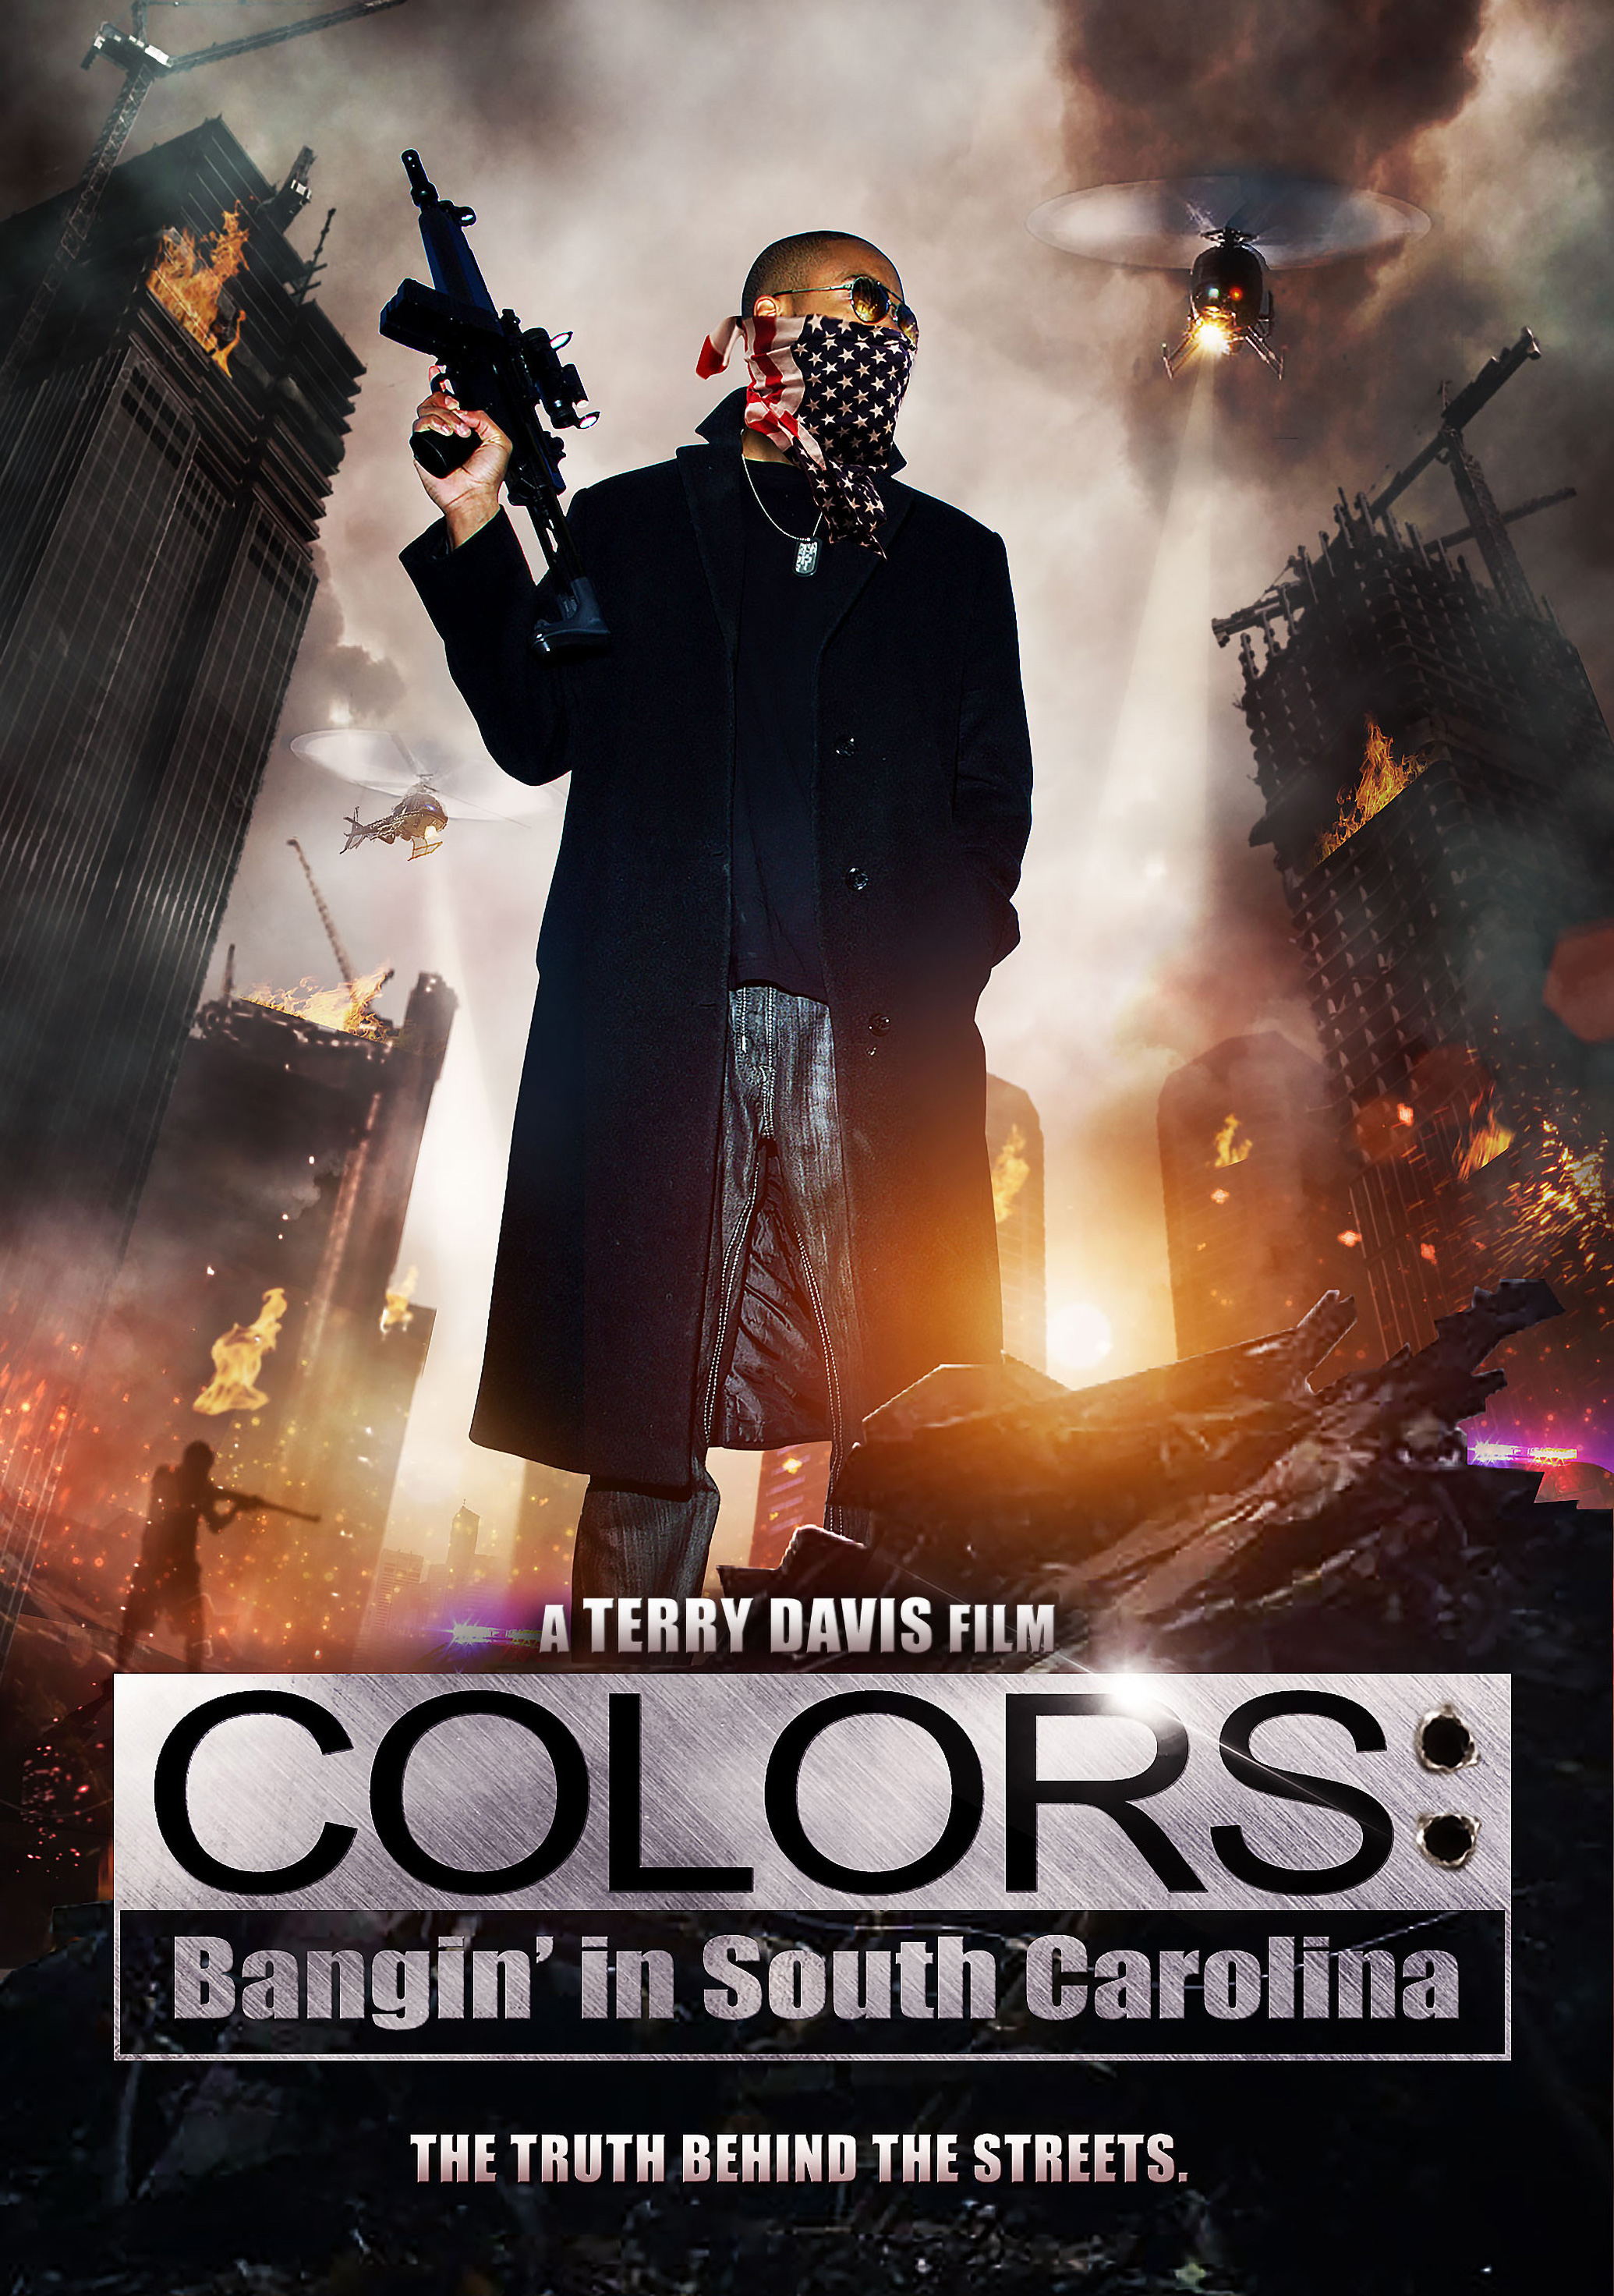 Movie Poster for Colors: Bangin‘ in South Carolina